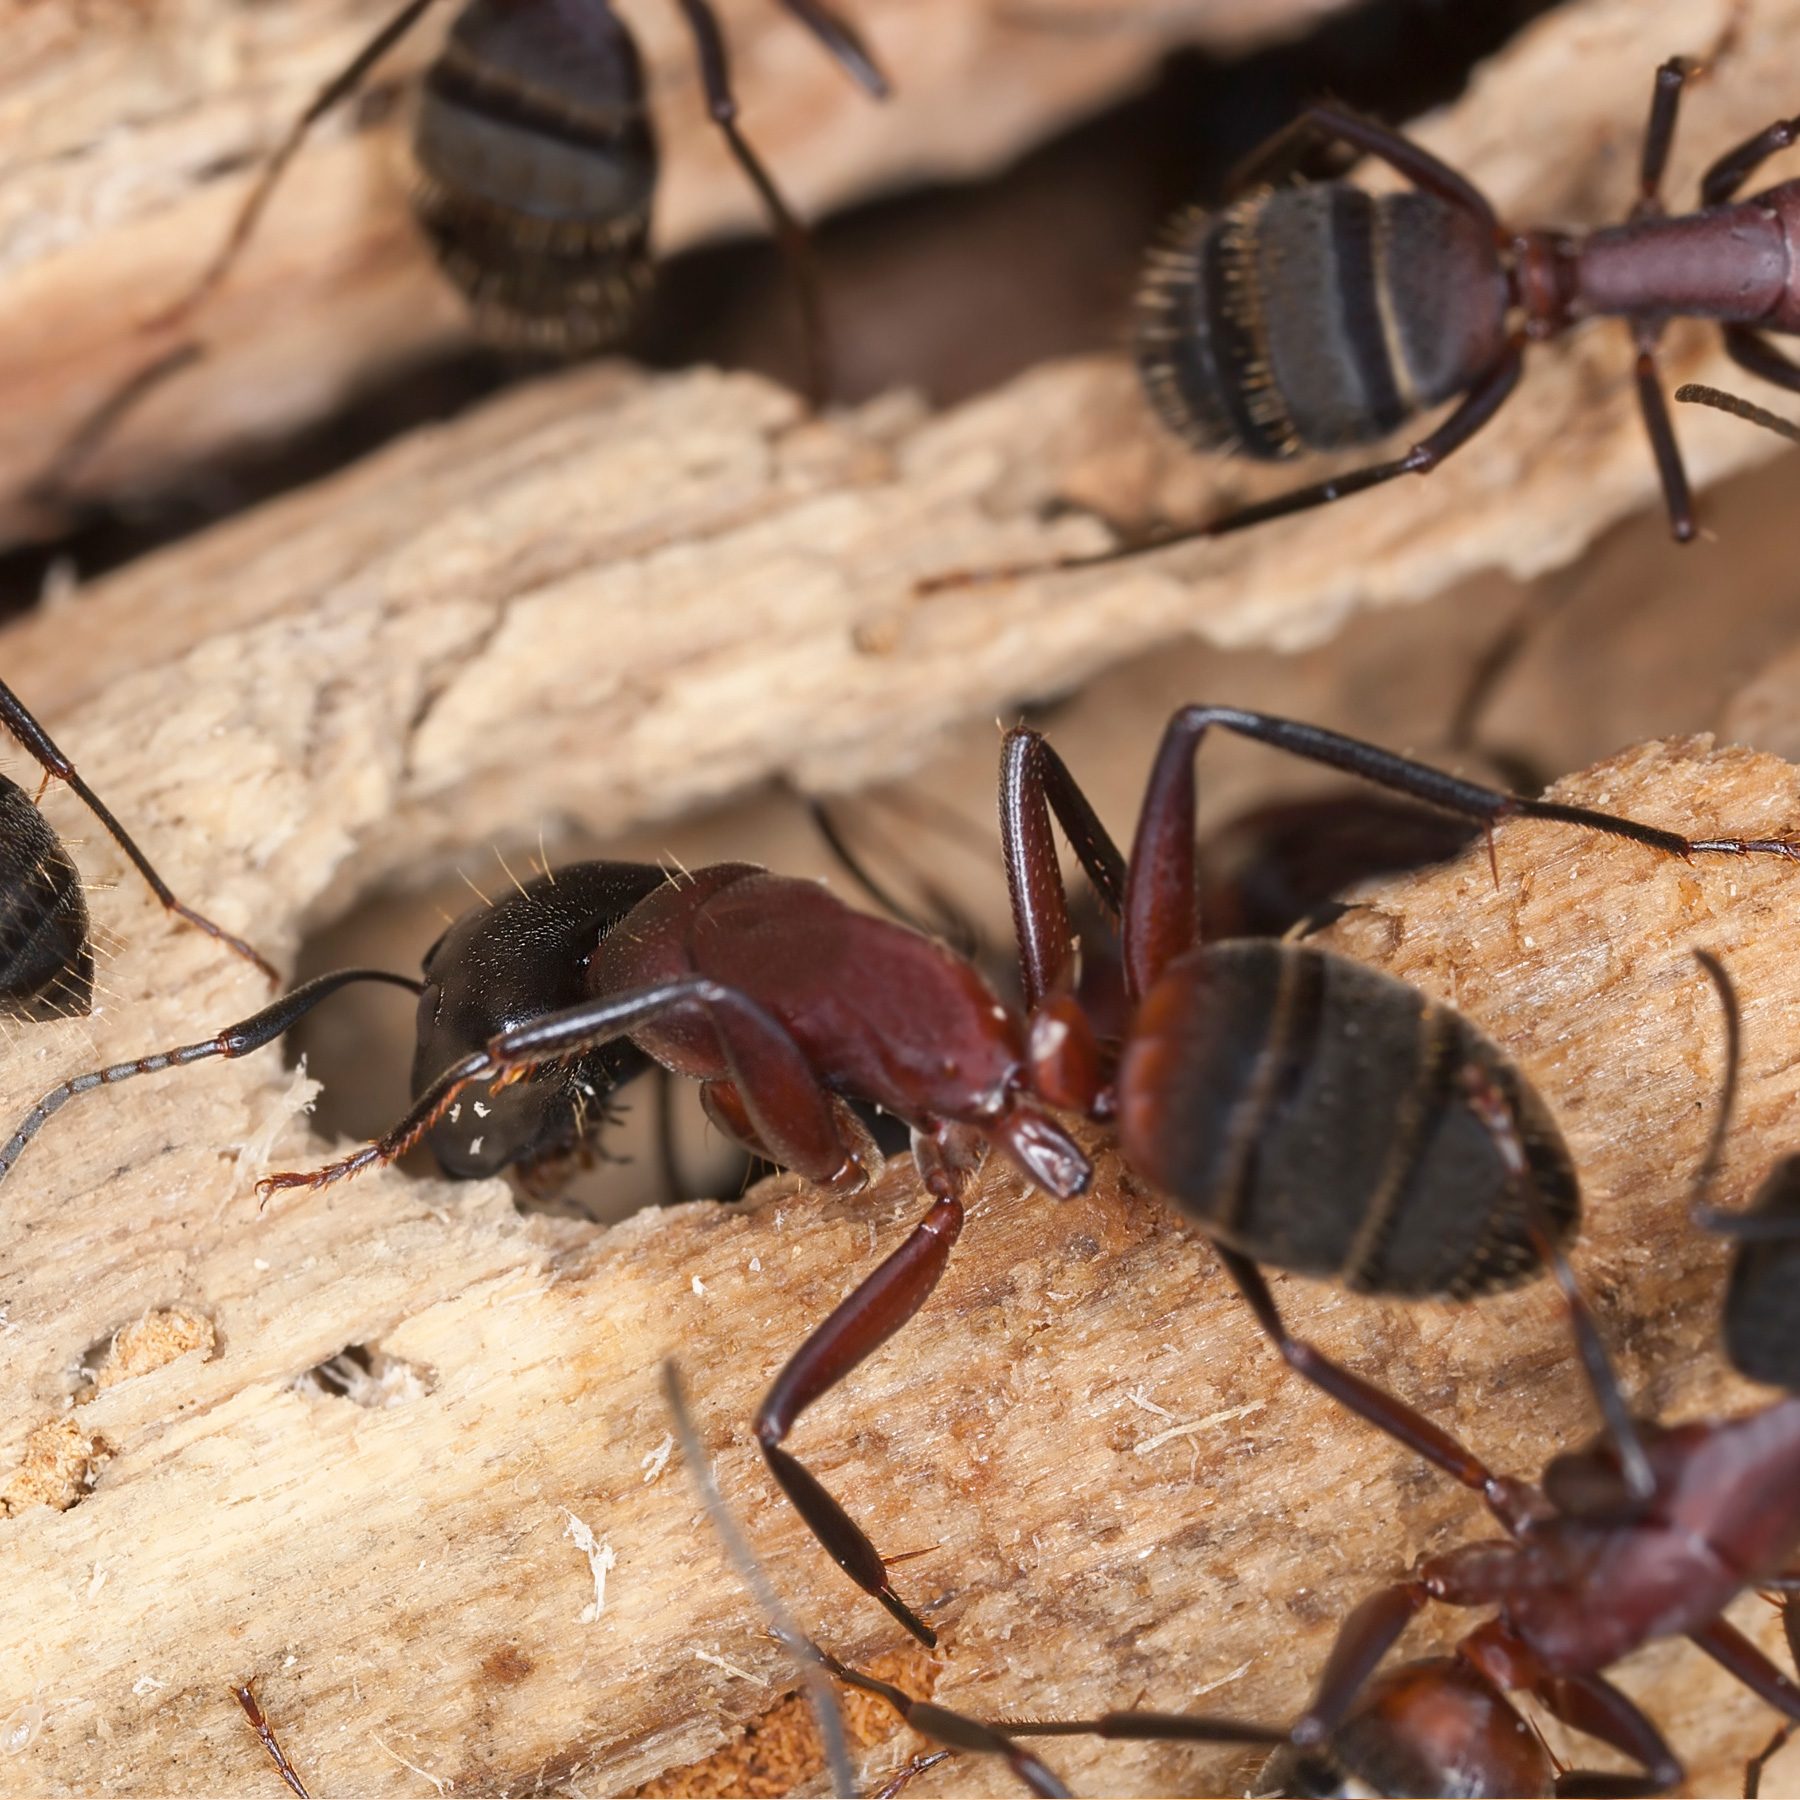 A group of ants crawling on a piece of wood.